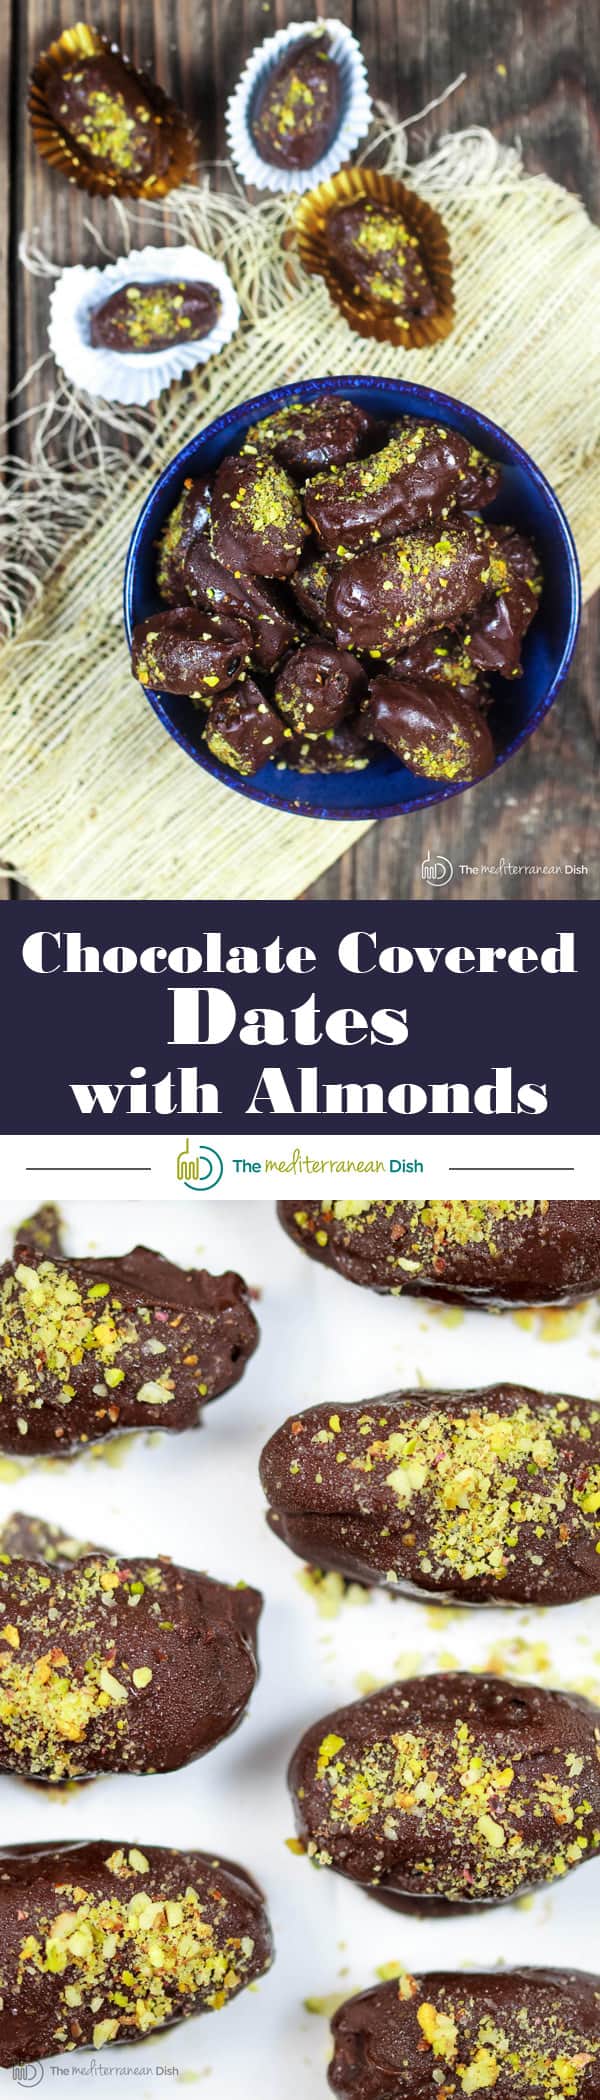 Chocolate Covered Date Recipe | The Mediterranean Dish. Melt-in-your-mouth soft medjool dates, stuffed with almonds and covered in chocolate! An easy make-ahead gluten free (and vegan) dessert. These homemade candy make the perfect edible gift!